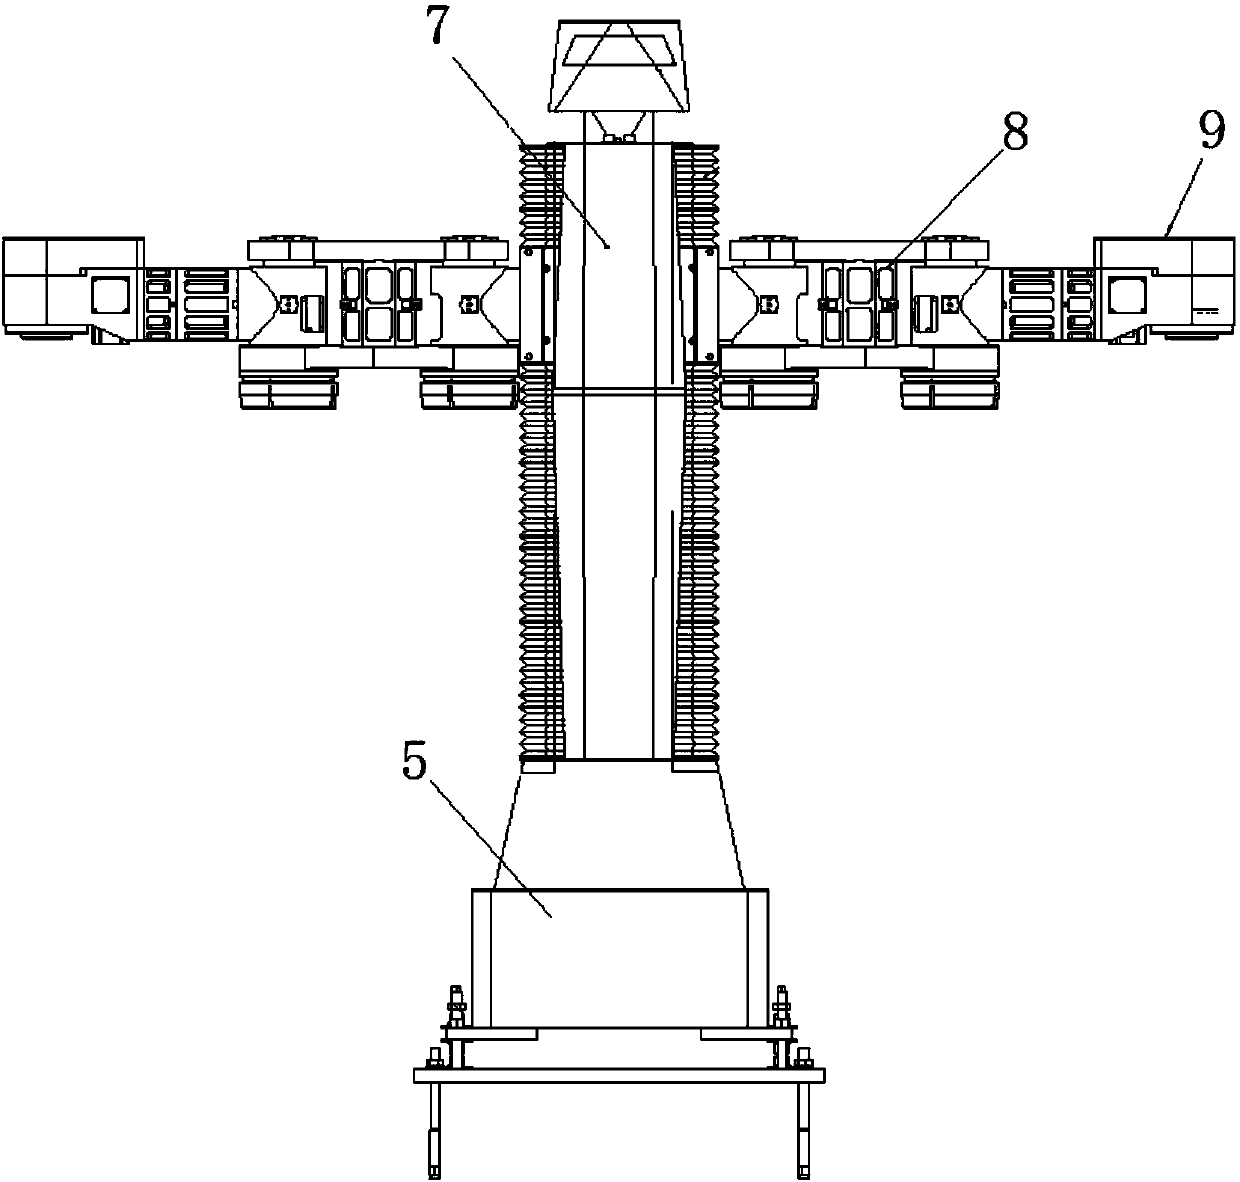 Turret punch press system based on two-arm robot